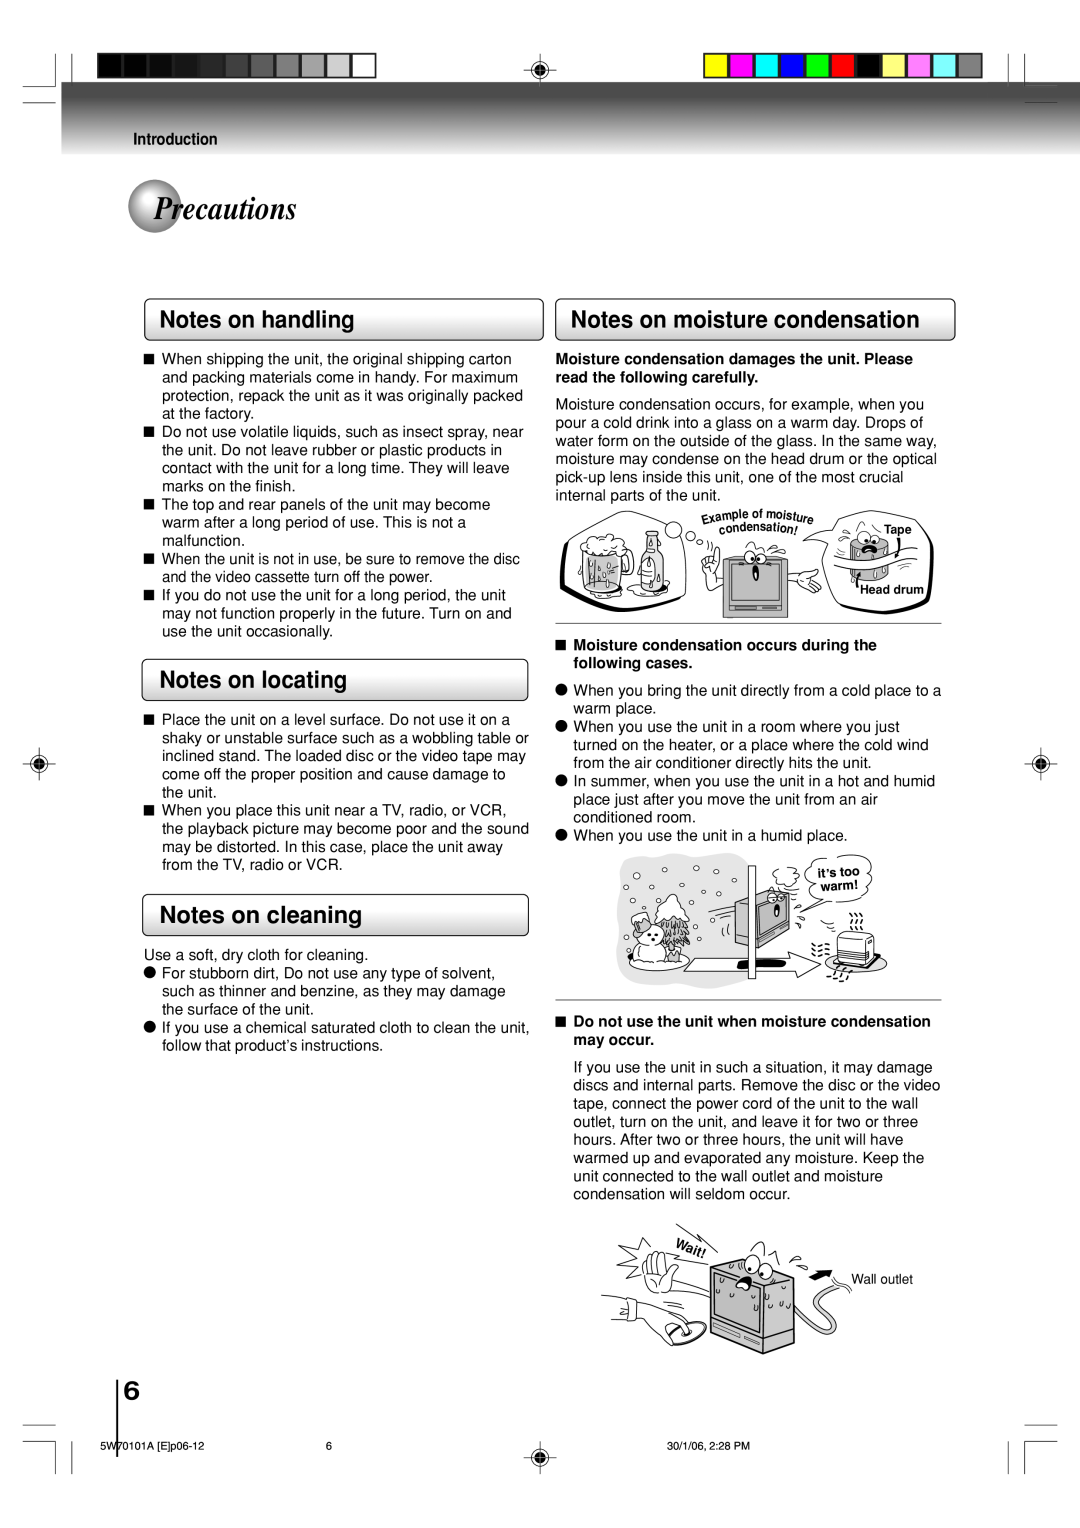 Toshiba MW24F52 Precautions, Notes on handling, Notes on moisture condensation, Notes on locating, Notes on cleaning, Wait 